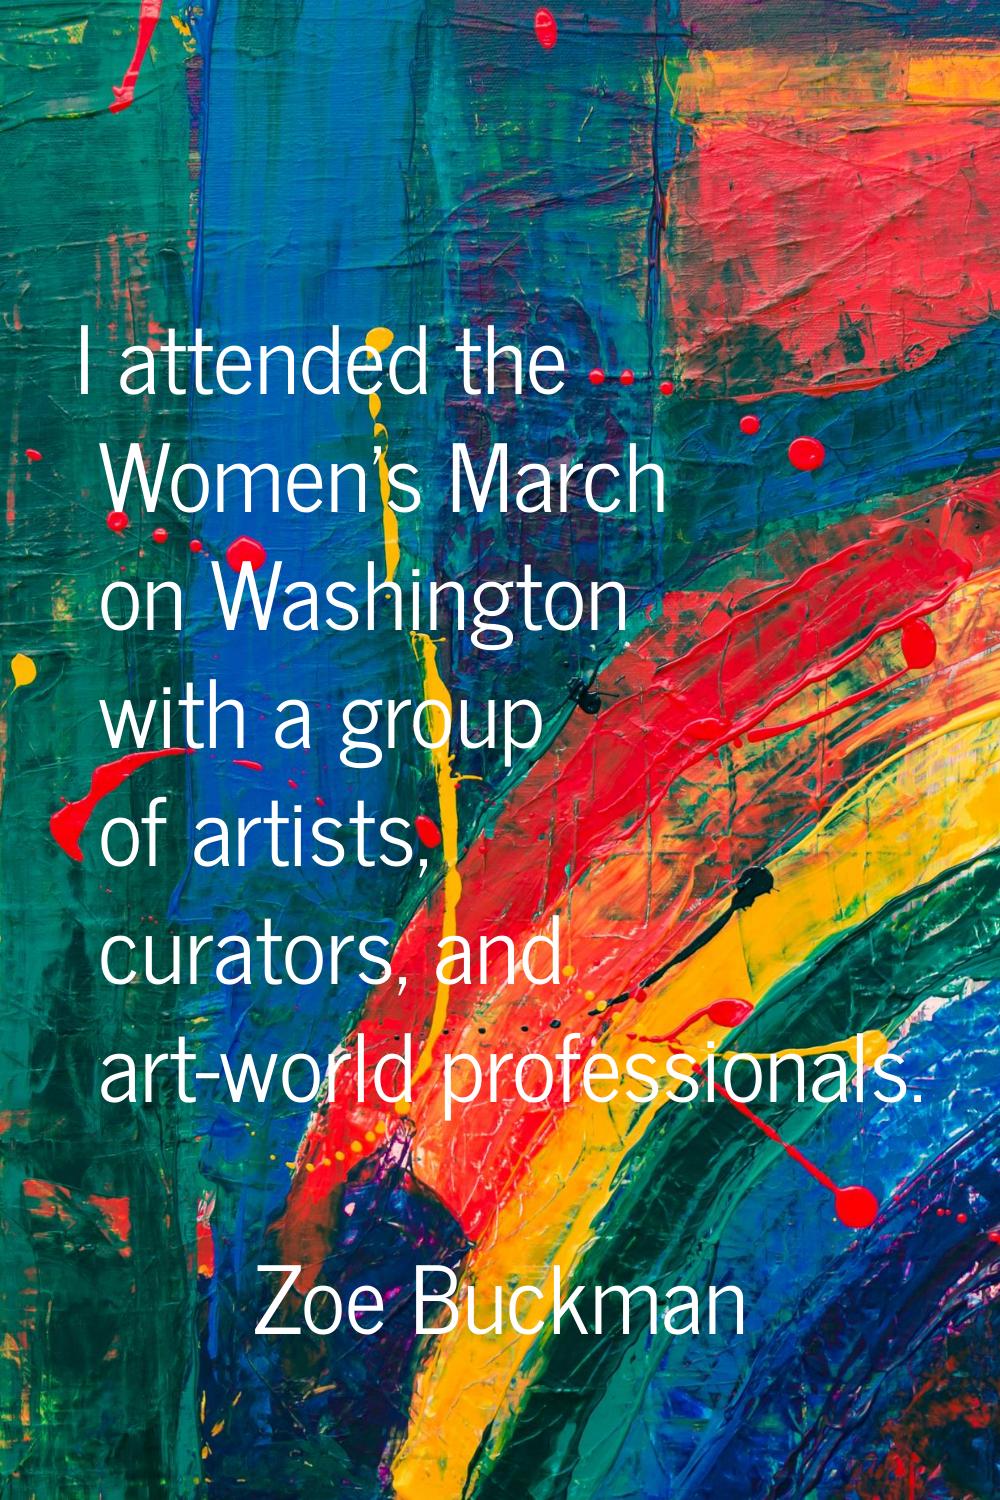 I attended the Women's March on Washington with a group of artists, curators, and art-world profess